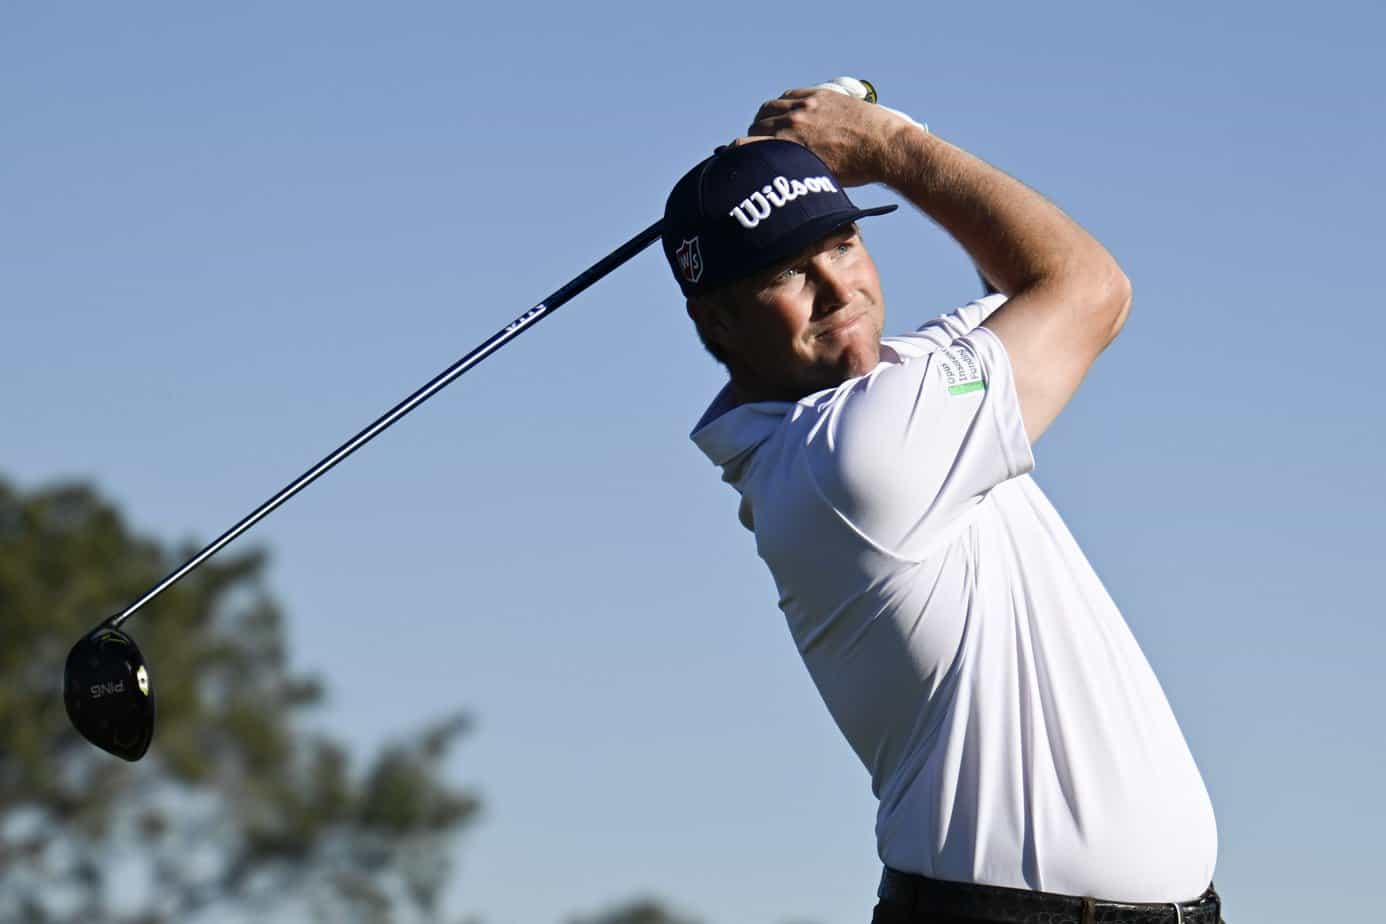 Our DFS PGA Picks this week include some truly amazing plays if you're looking for leverage at 2023 PGA TOUR Championship...